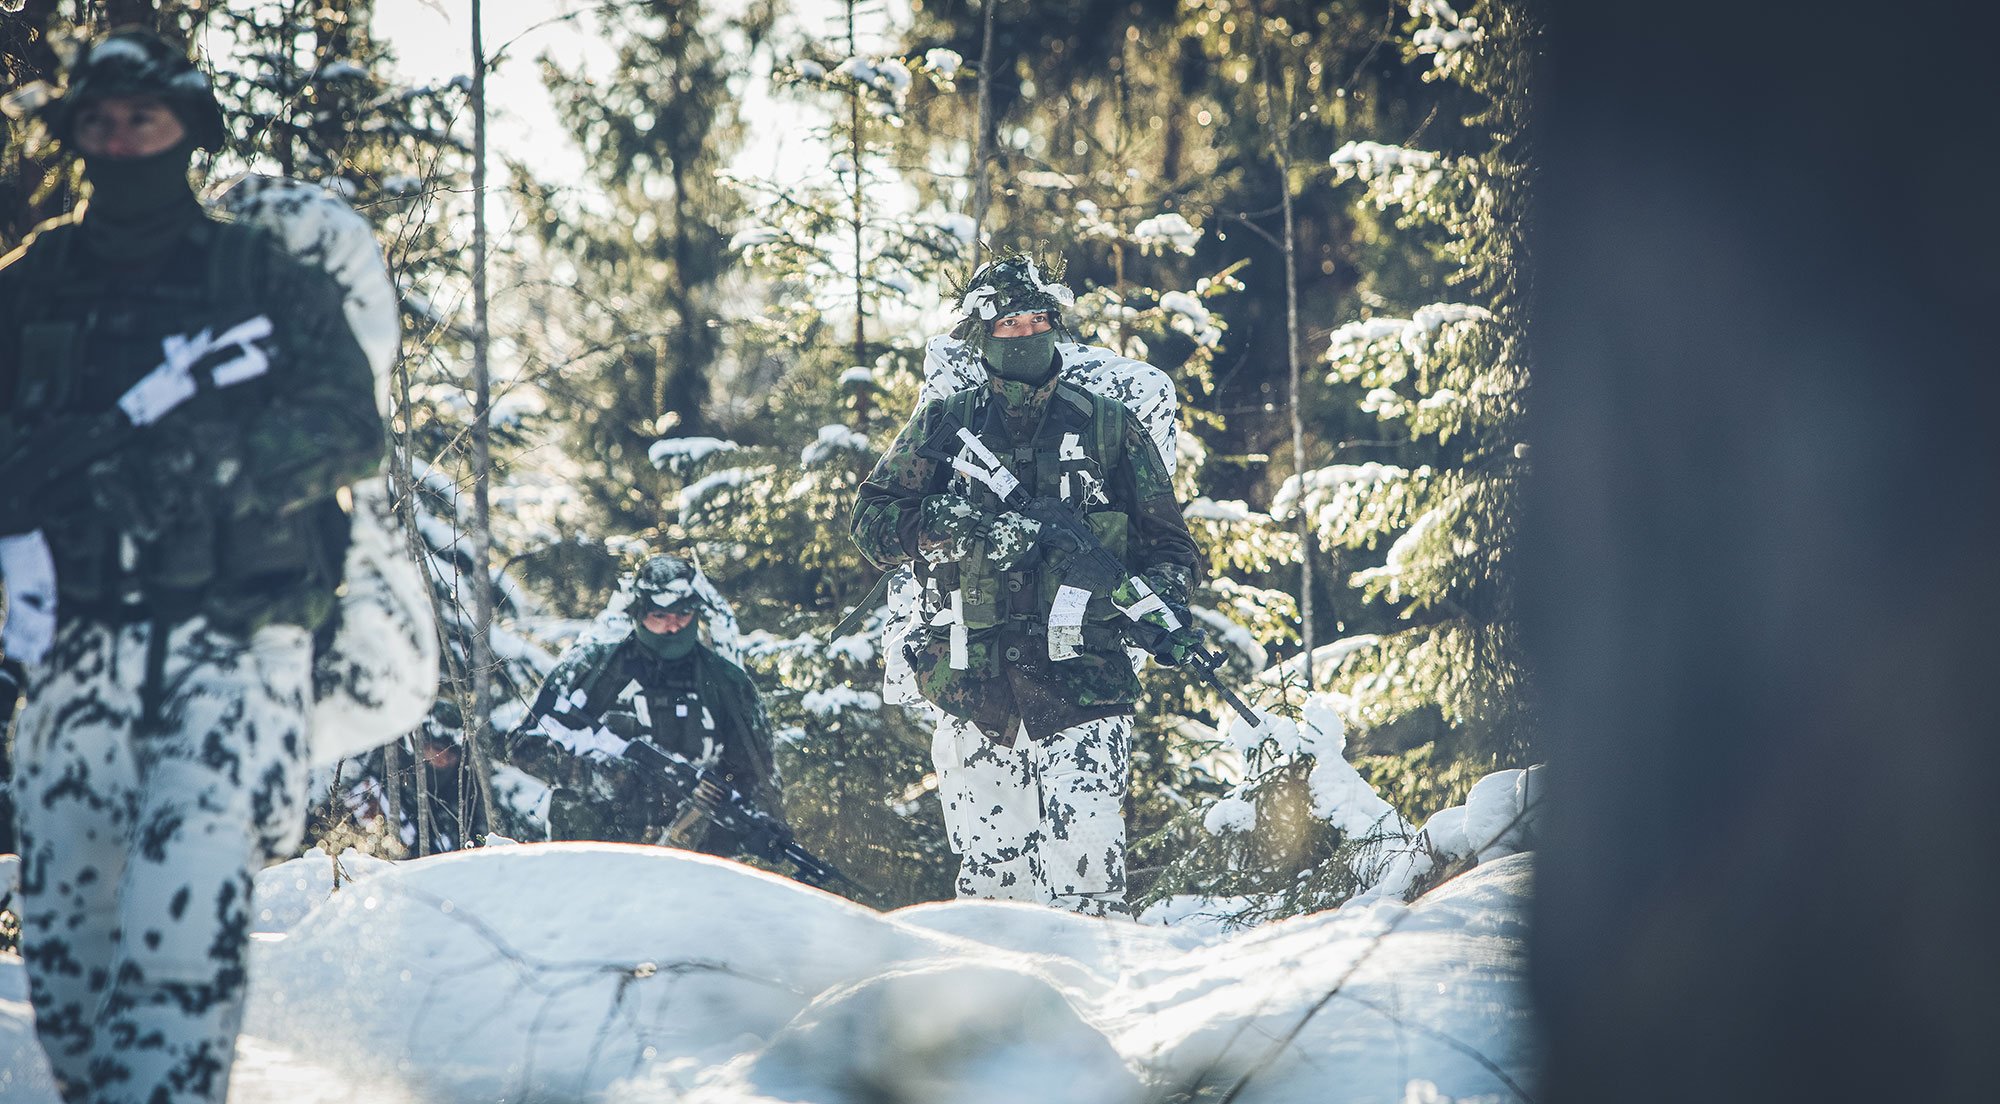 M05 forest camo upper body combined with lower body snow camo soldiers in the forest